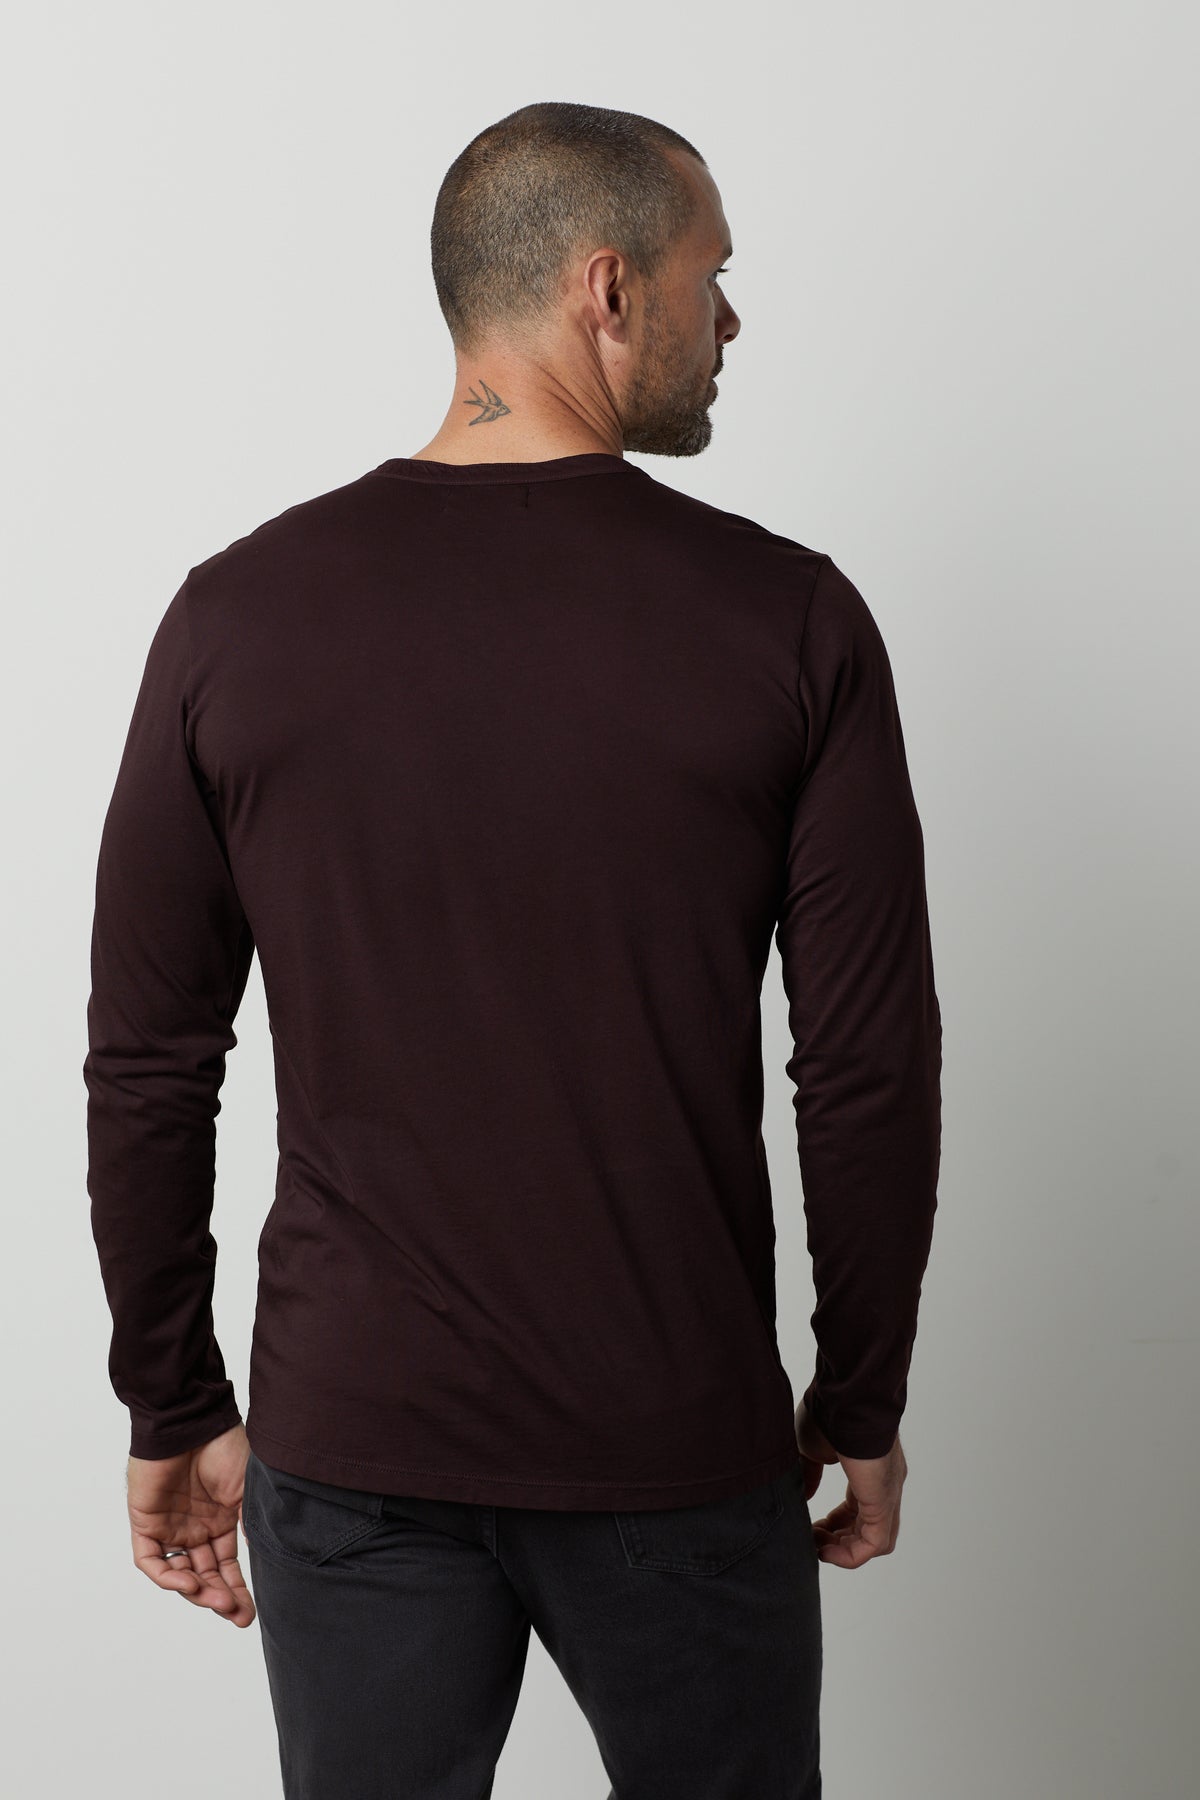 The back view of a man wearing a Velvet by Graham & Spencer ALVARO COTTON JERSEY HENLEY with a vintage-look.-35547510407361